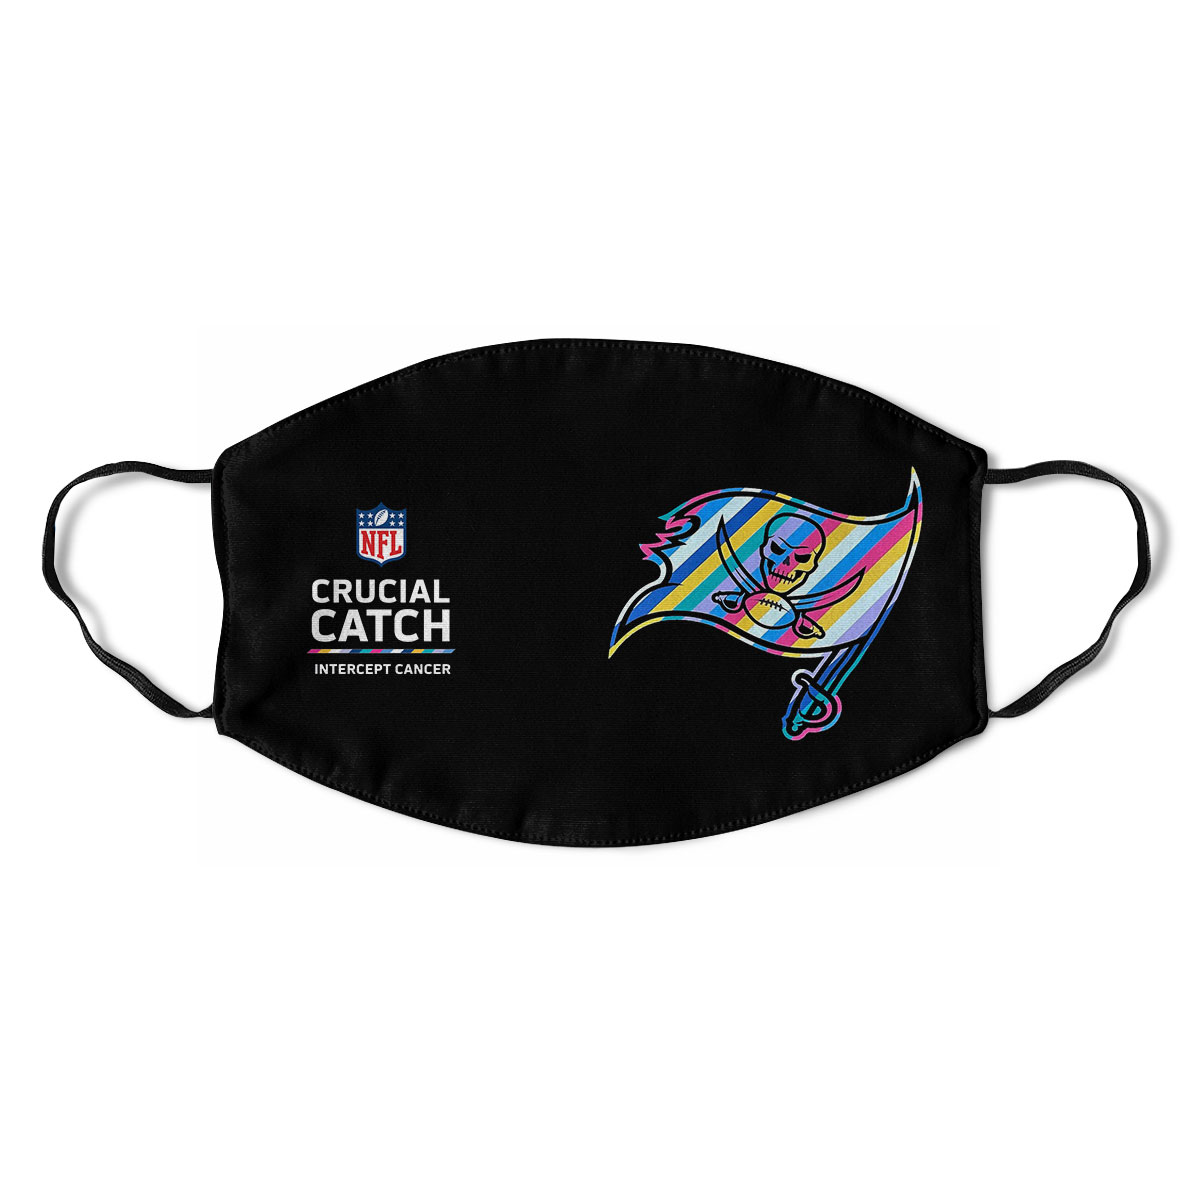 Seattle Seahawks Nfl Crucial Catch Multicolor Face Mask Anti-pollution